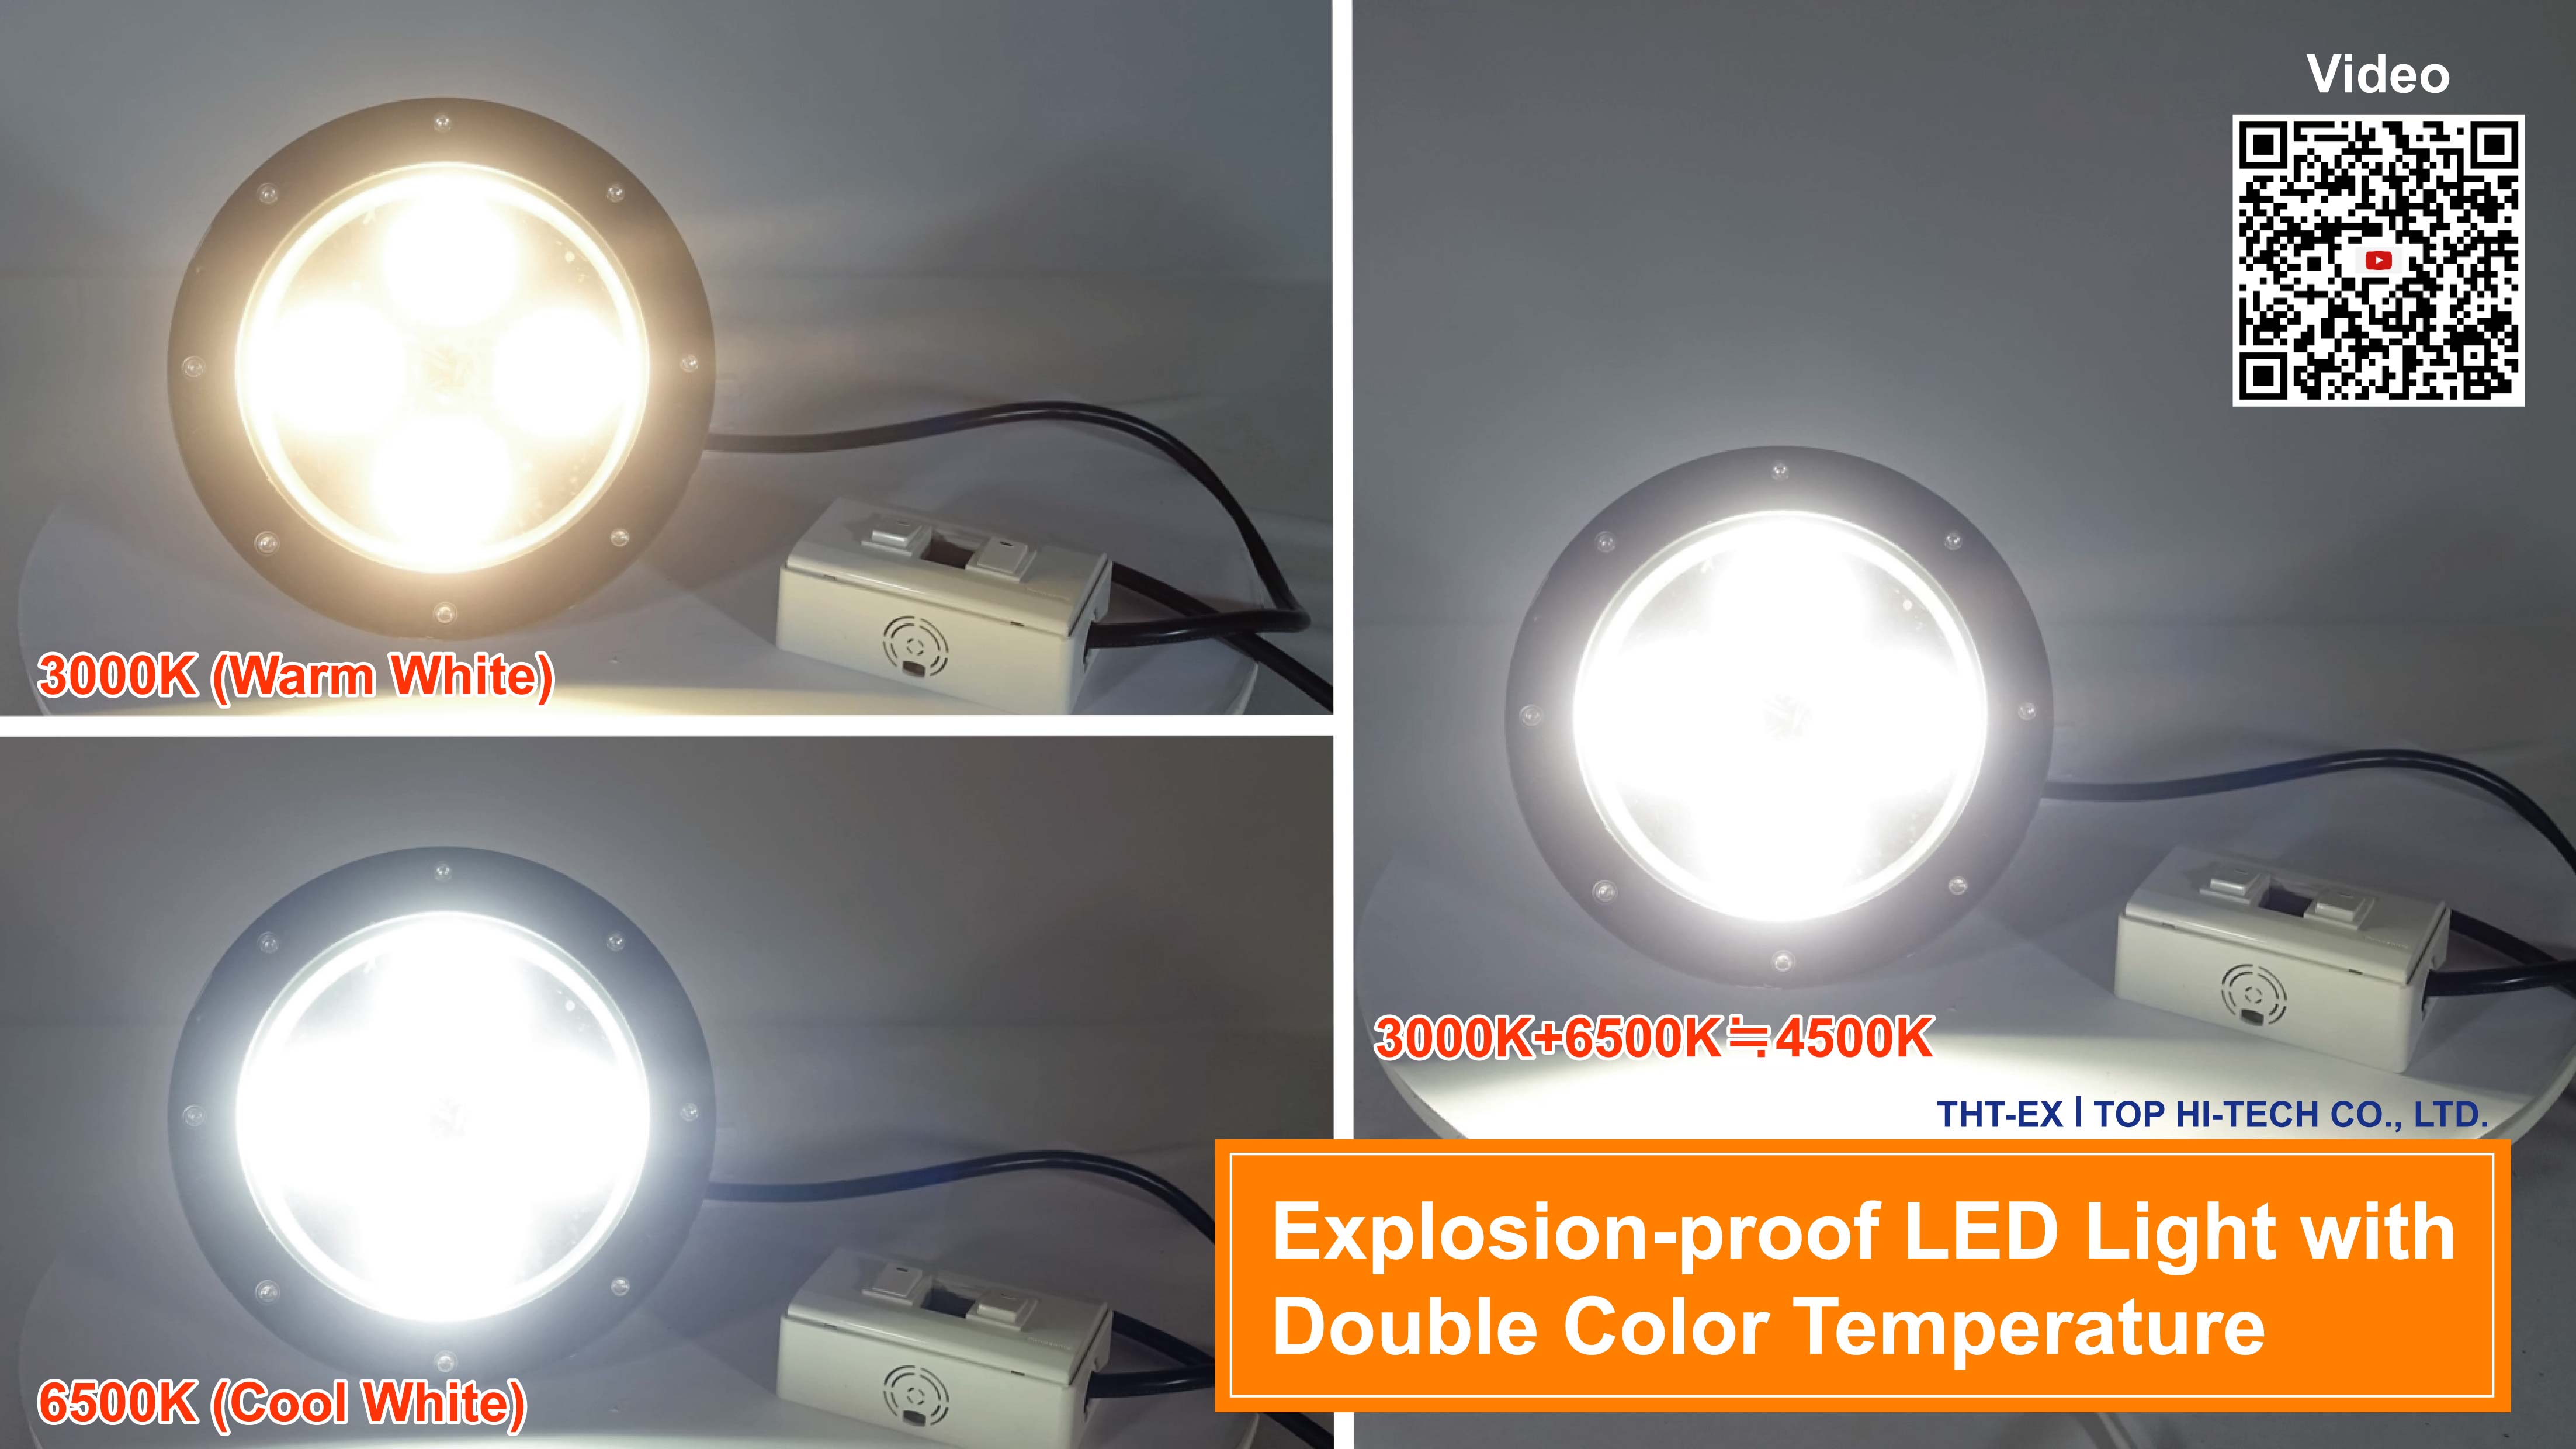  Explosion-proof Light with Double Color Temperature, Free to Switch Light Color as Needed!